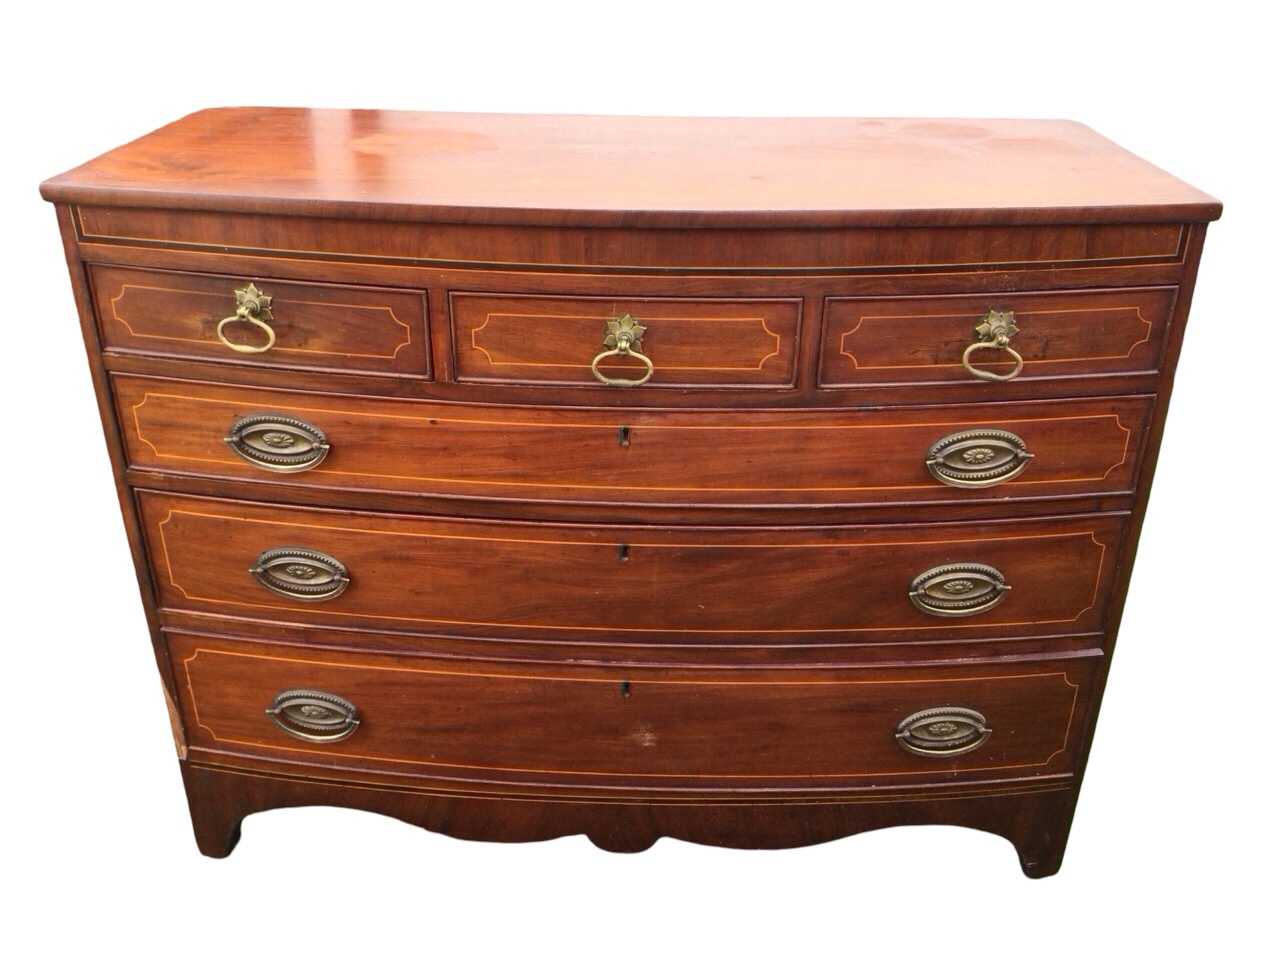 A nineteenth century bowfronted mahogany chest inlaid with boxwood stringing, having three short and